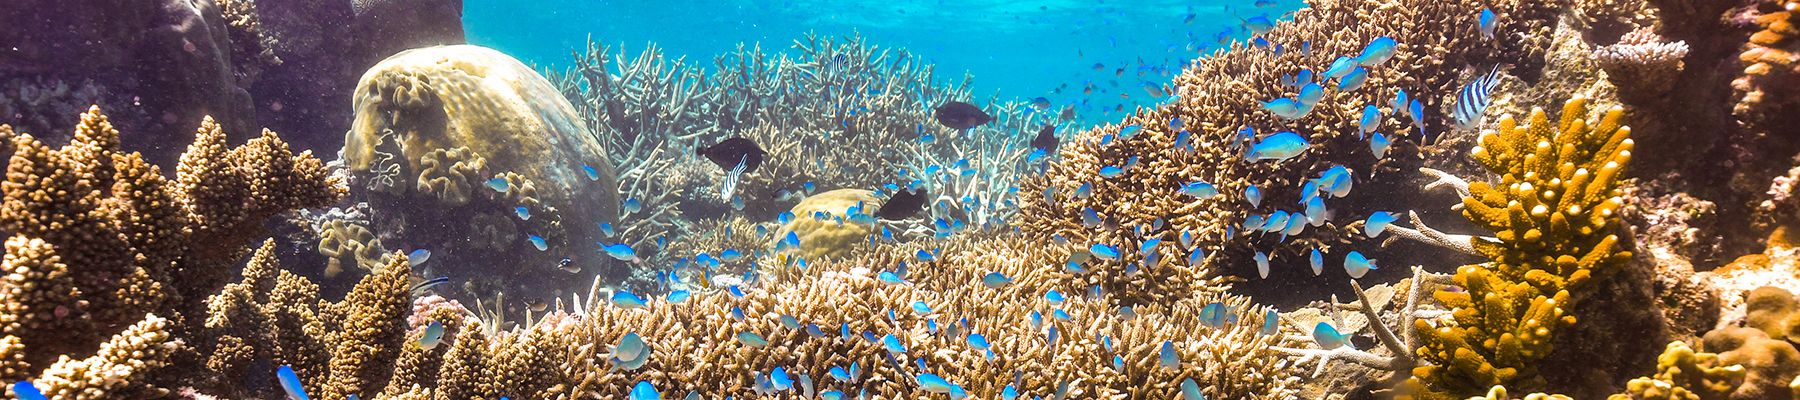 Corals and fish in the Great Barrier Reef